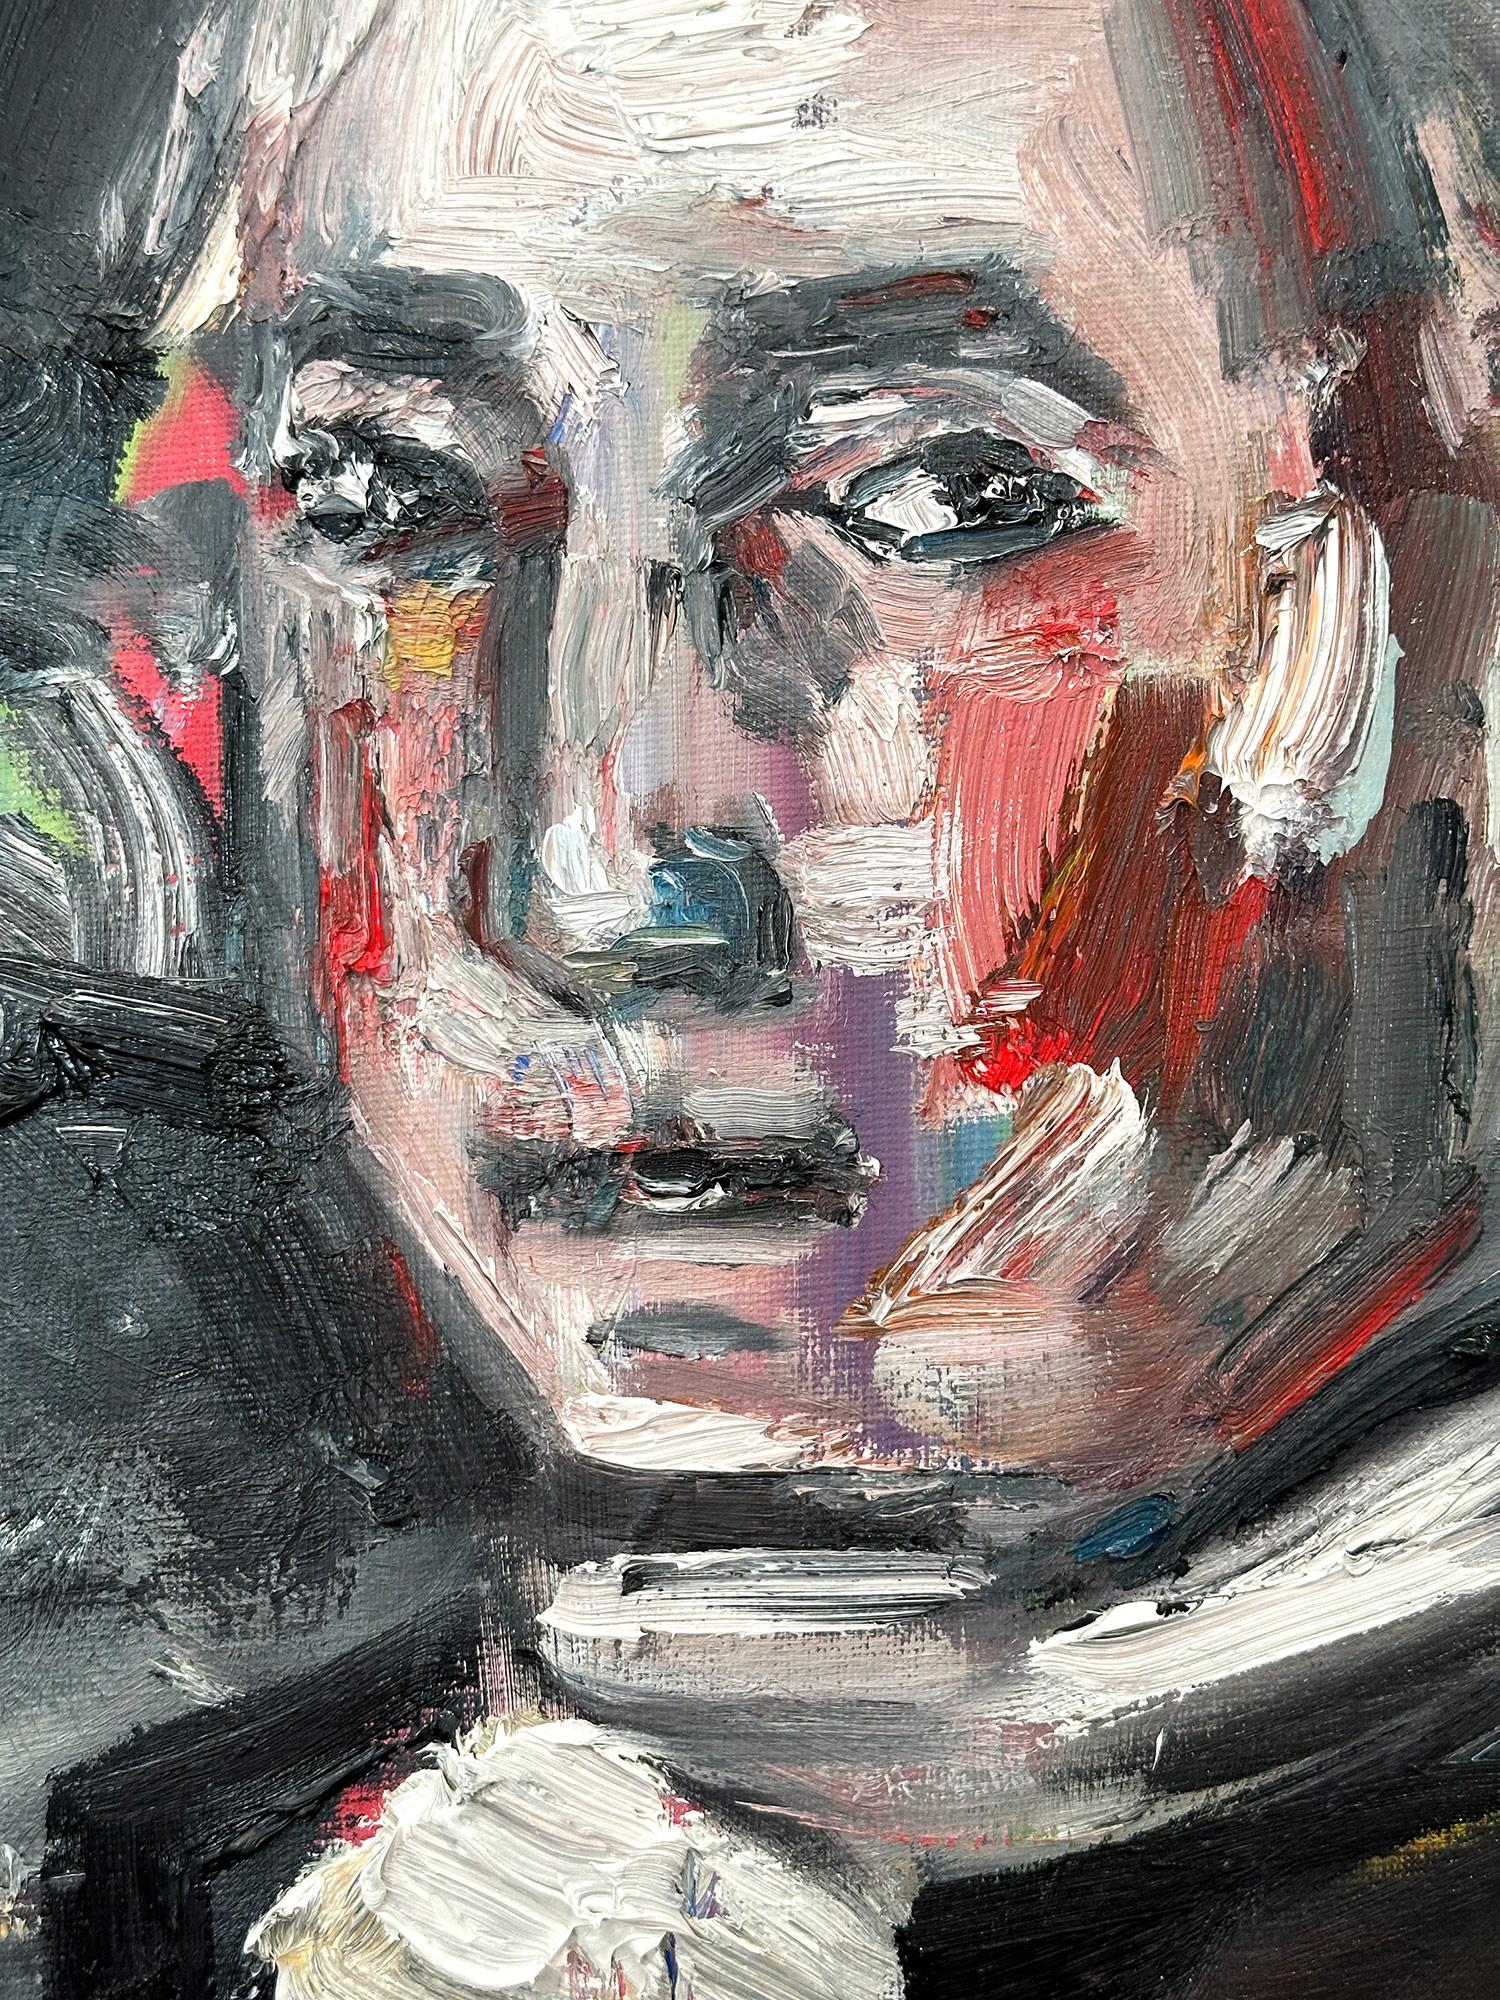 This painting depicts an impressionistic and abstract portrait of George Washington. The thick brush strokes and fun marks creates an atmosphere reminiscent of the impressionists from the 20th Century. We can feel the moment in time effortlessly.